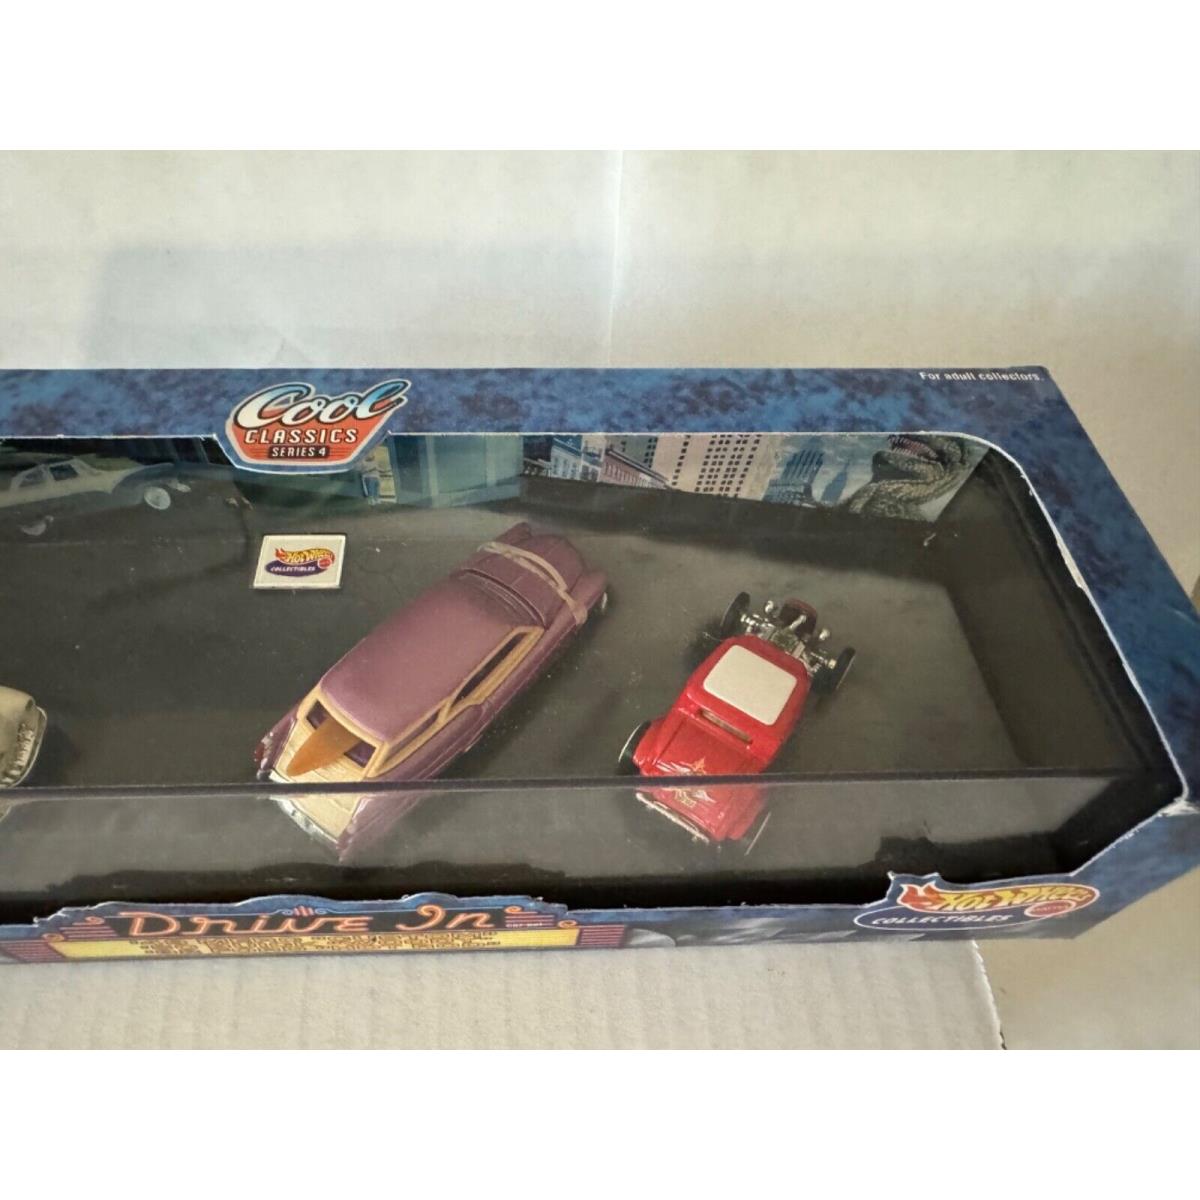 Hot Wheels Cool Classics Drive In Hot Rods 32 Ford 49 Merc 50 Buick C2